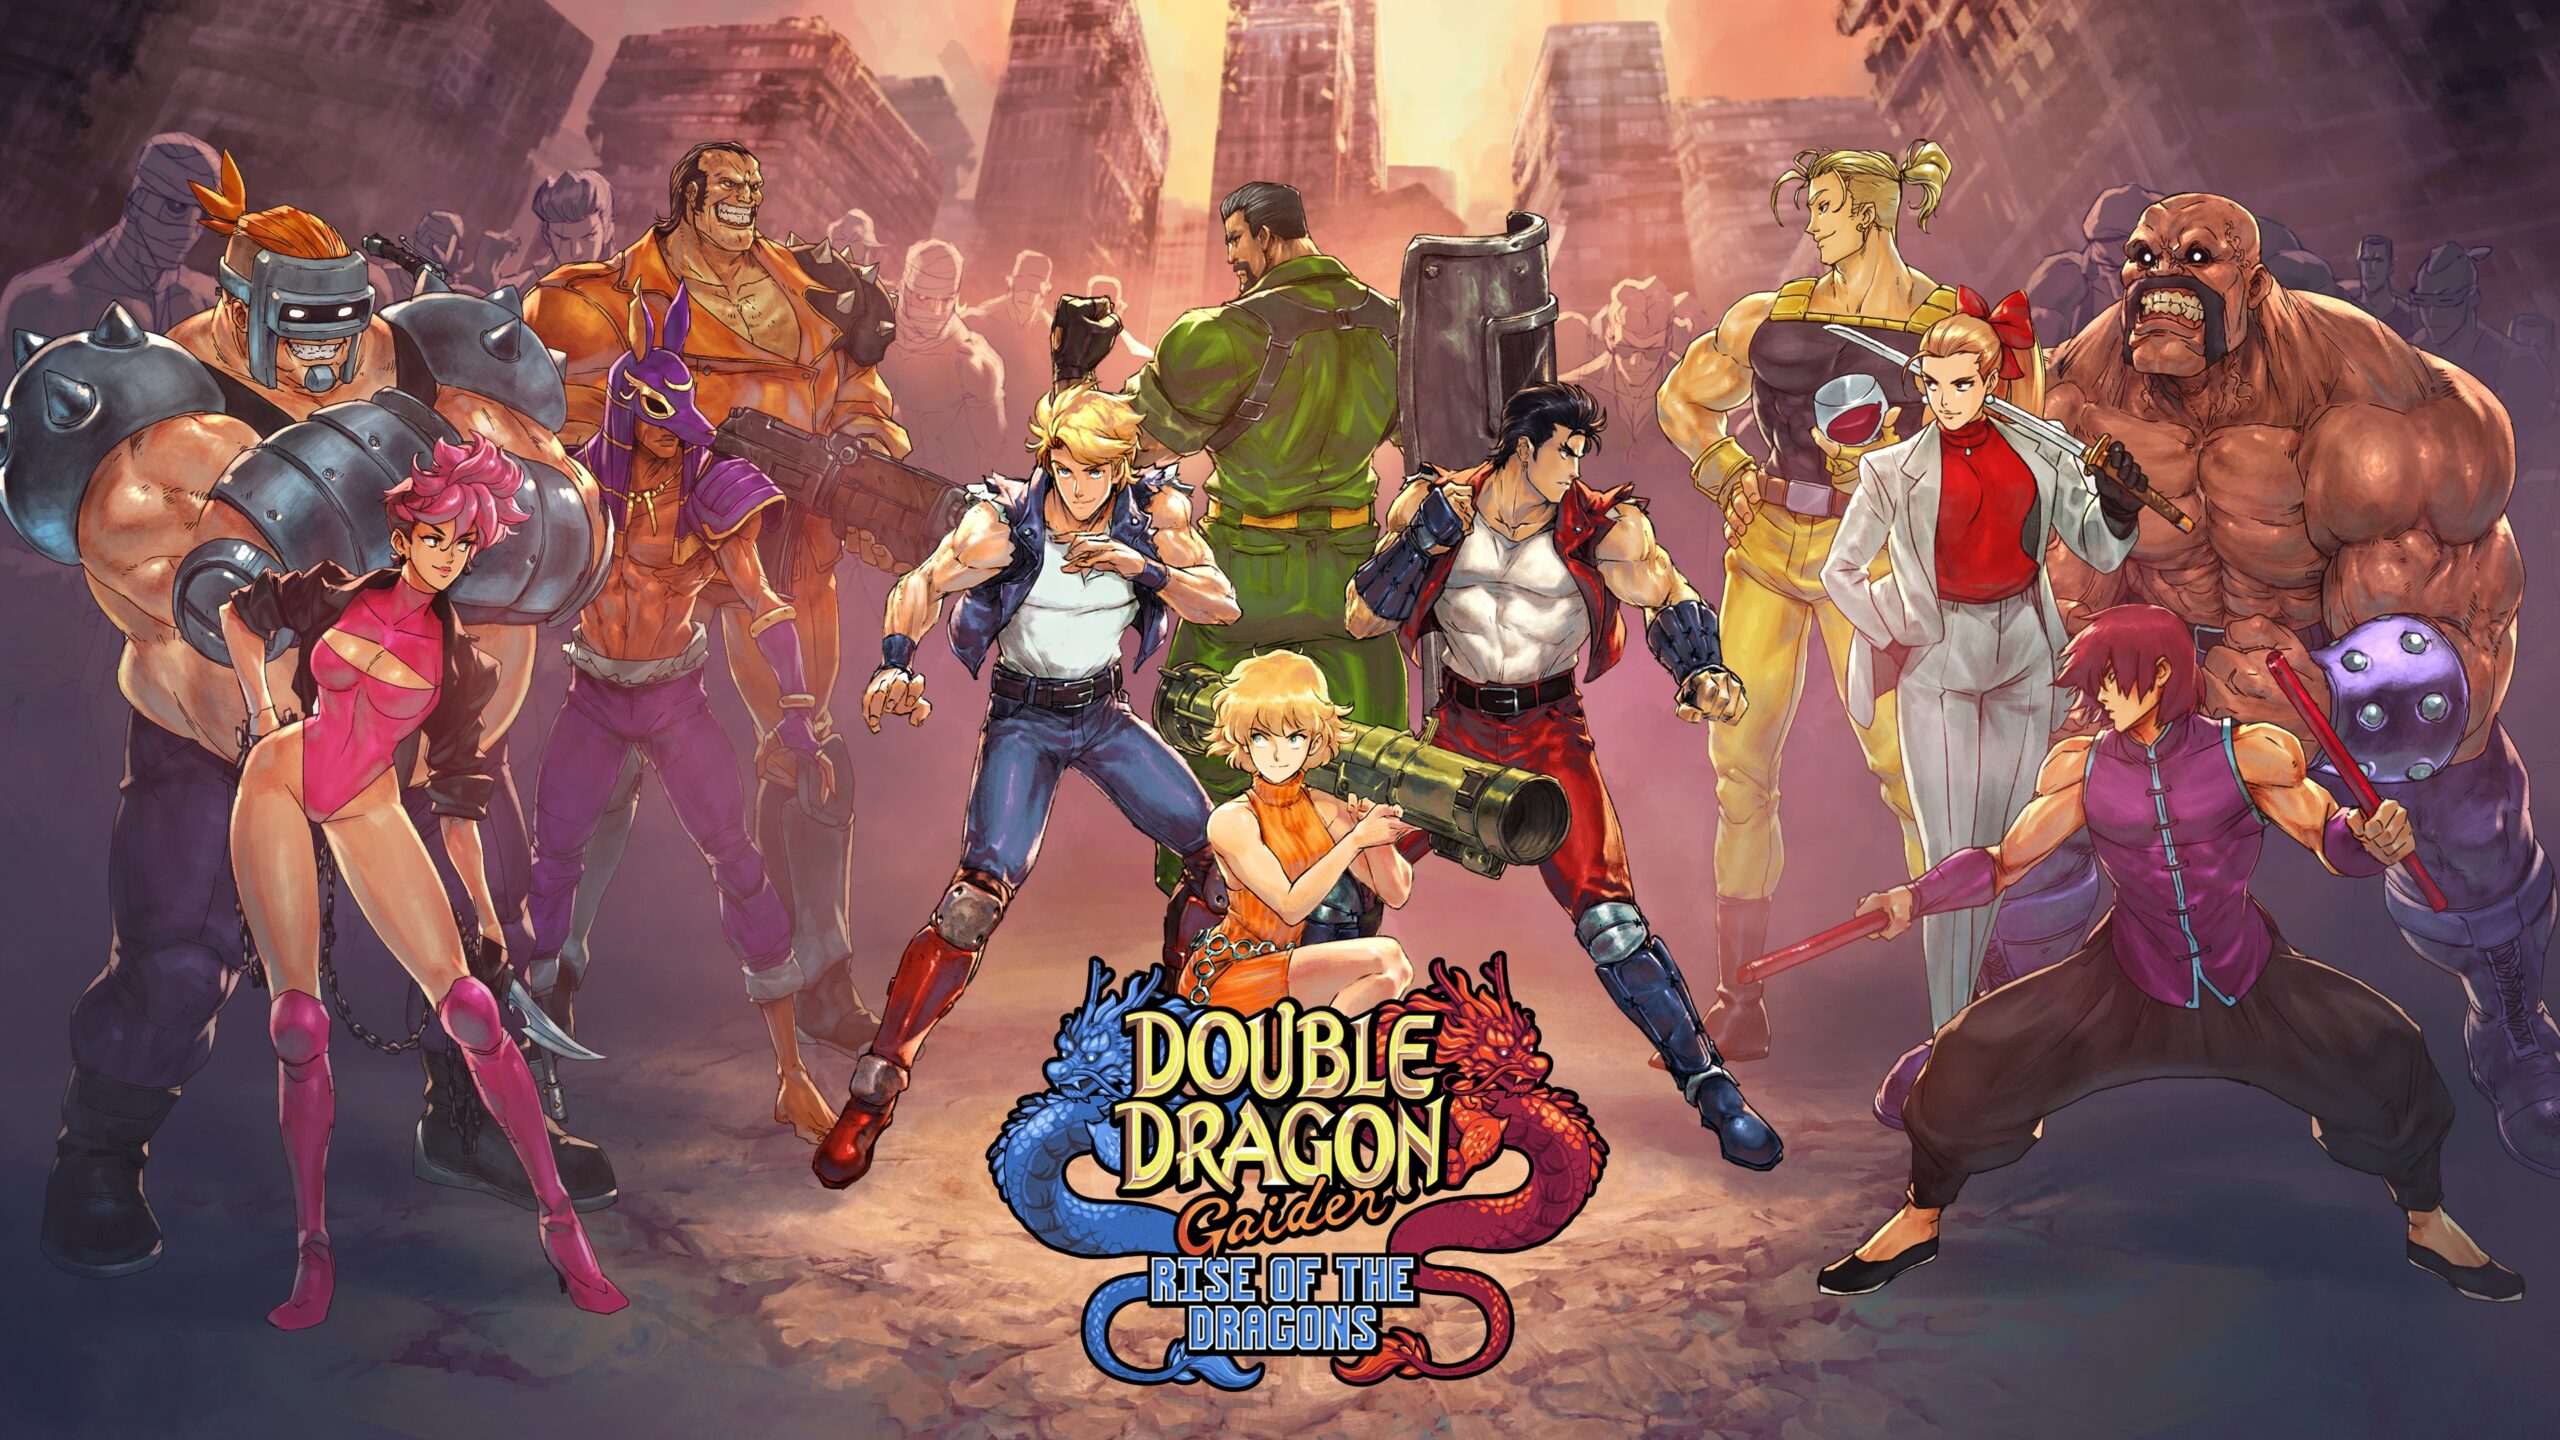 Double Dragon Gaiden: Rise of the Dragons Review (Switch